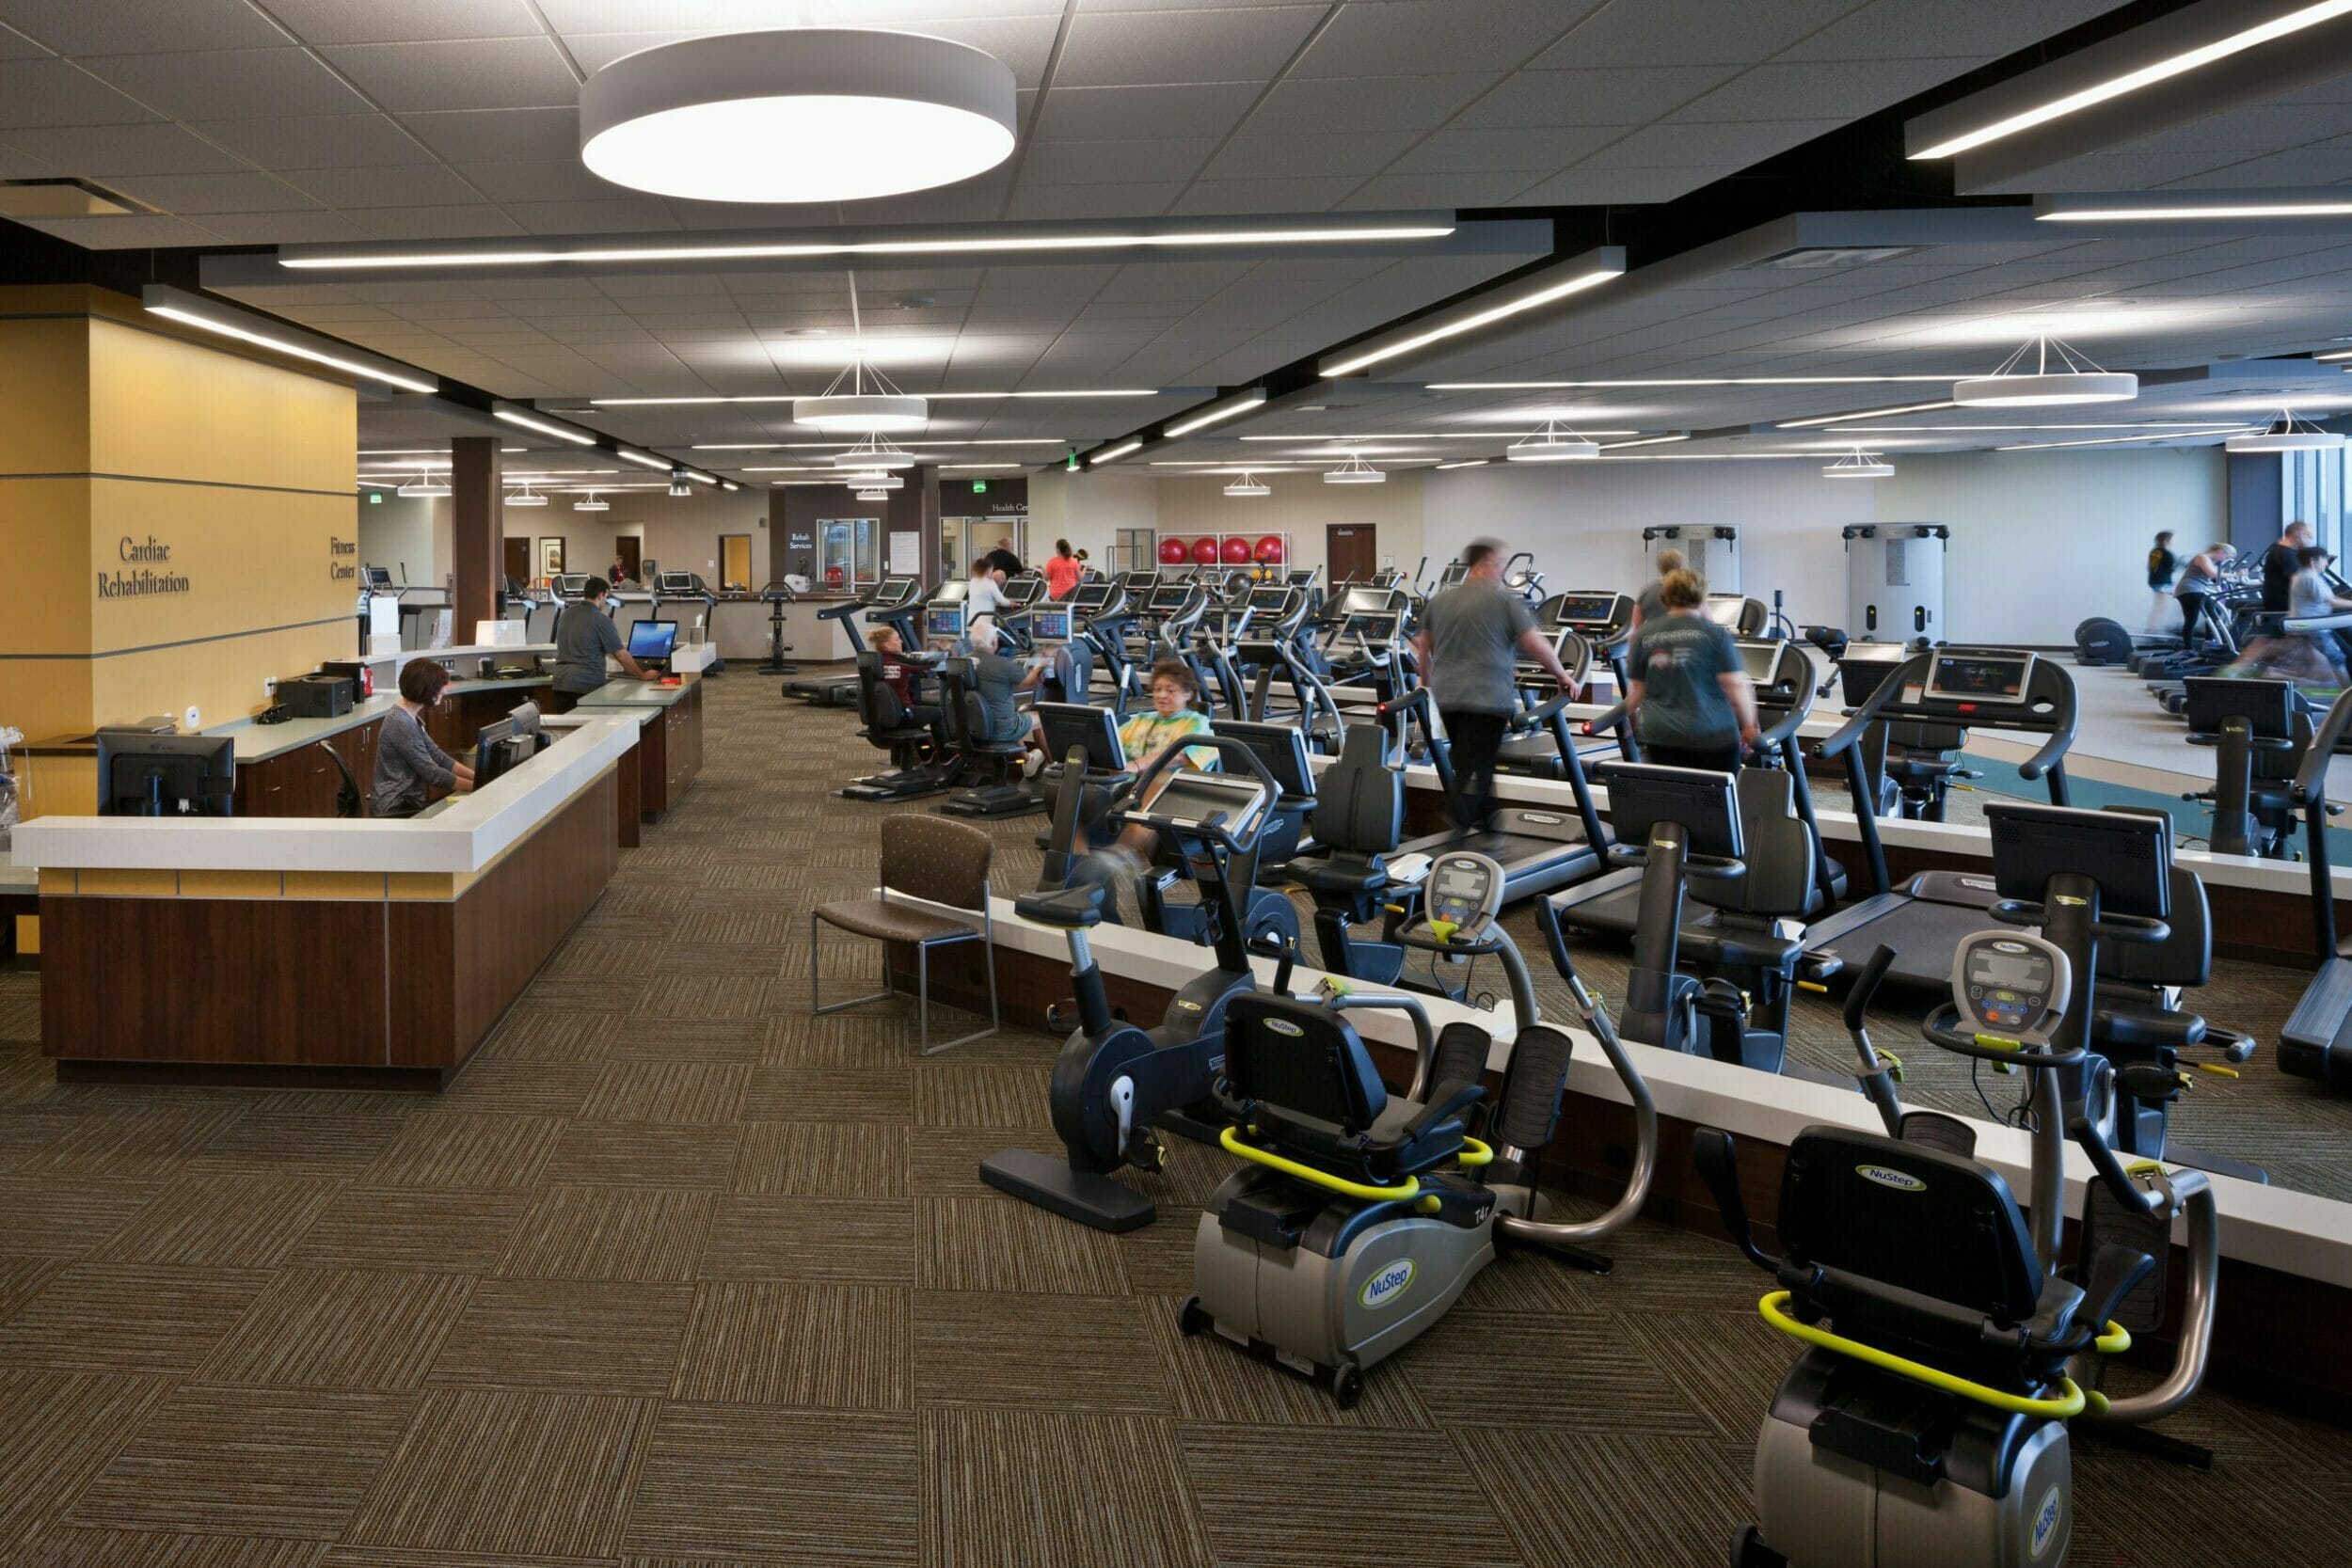 gym inside cardiac rehabilitation center with people using various workout equipments